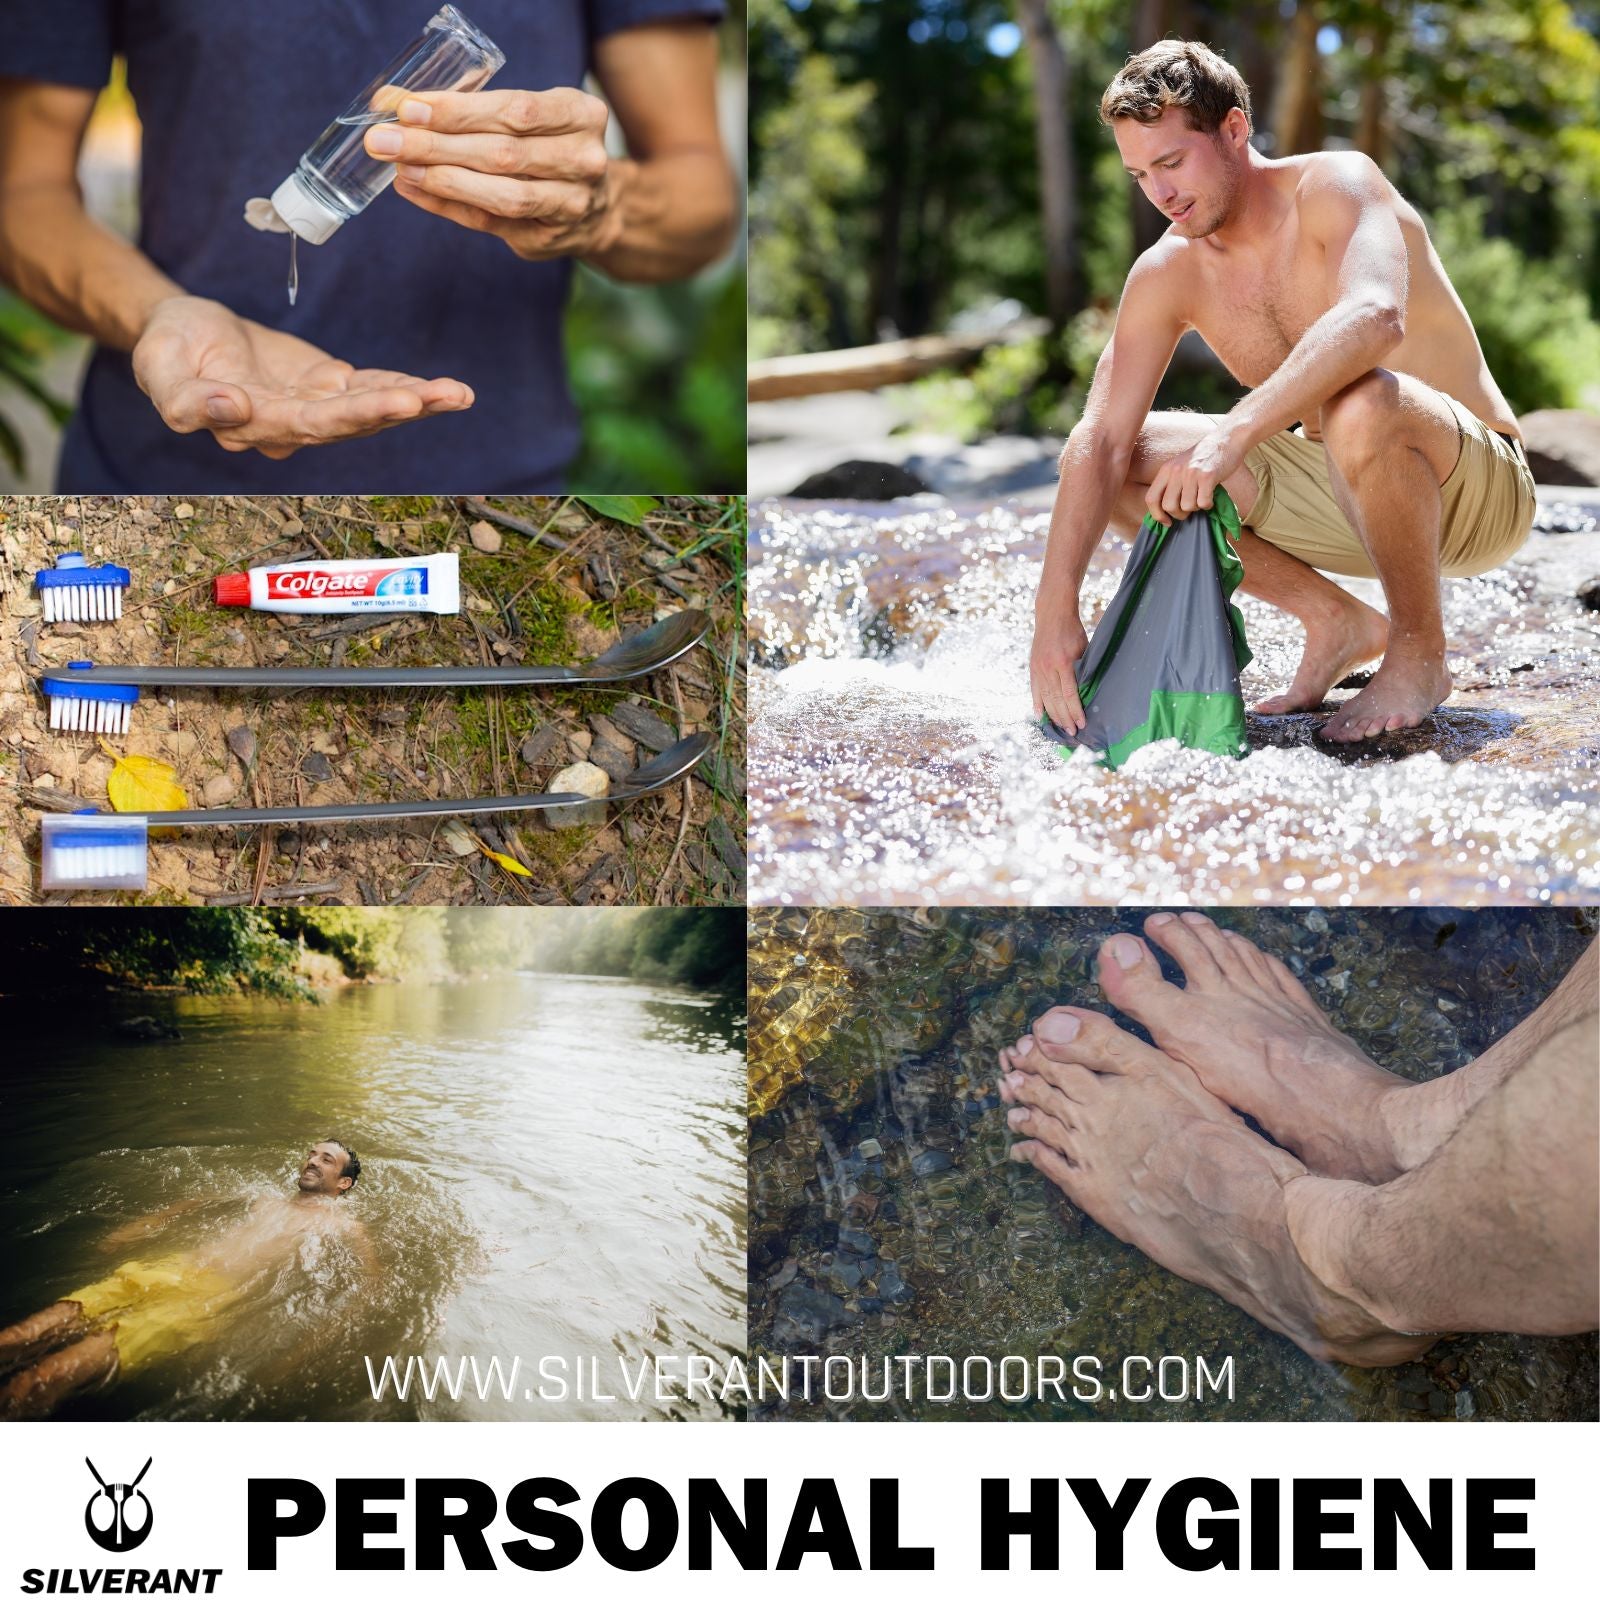 Personal Hygiene - SilverAnt Outdoors